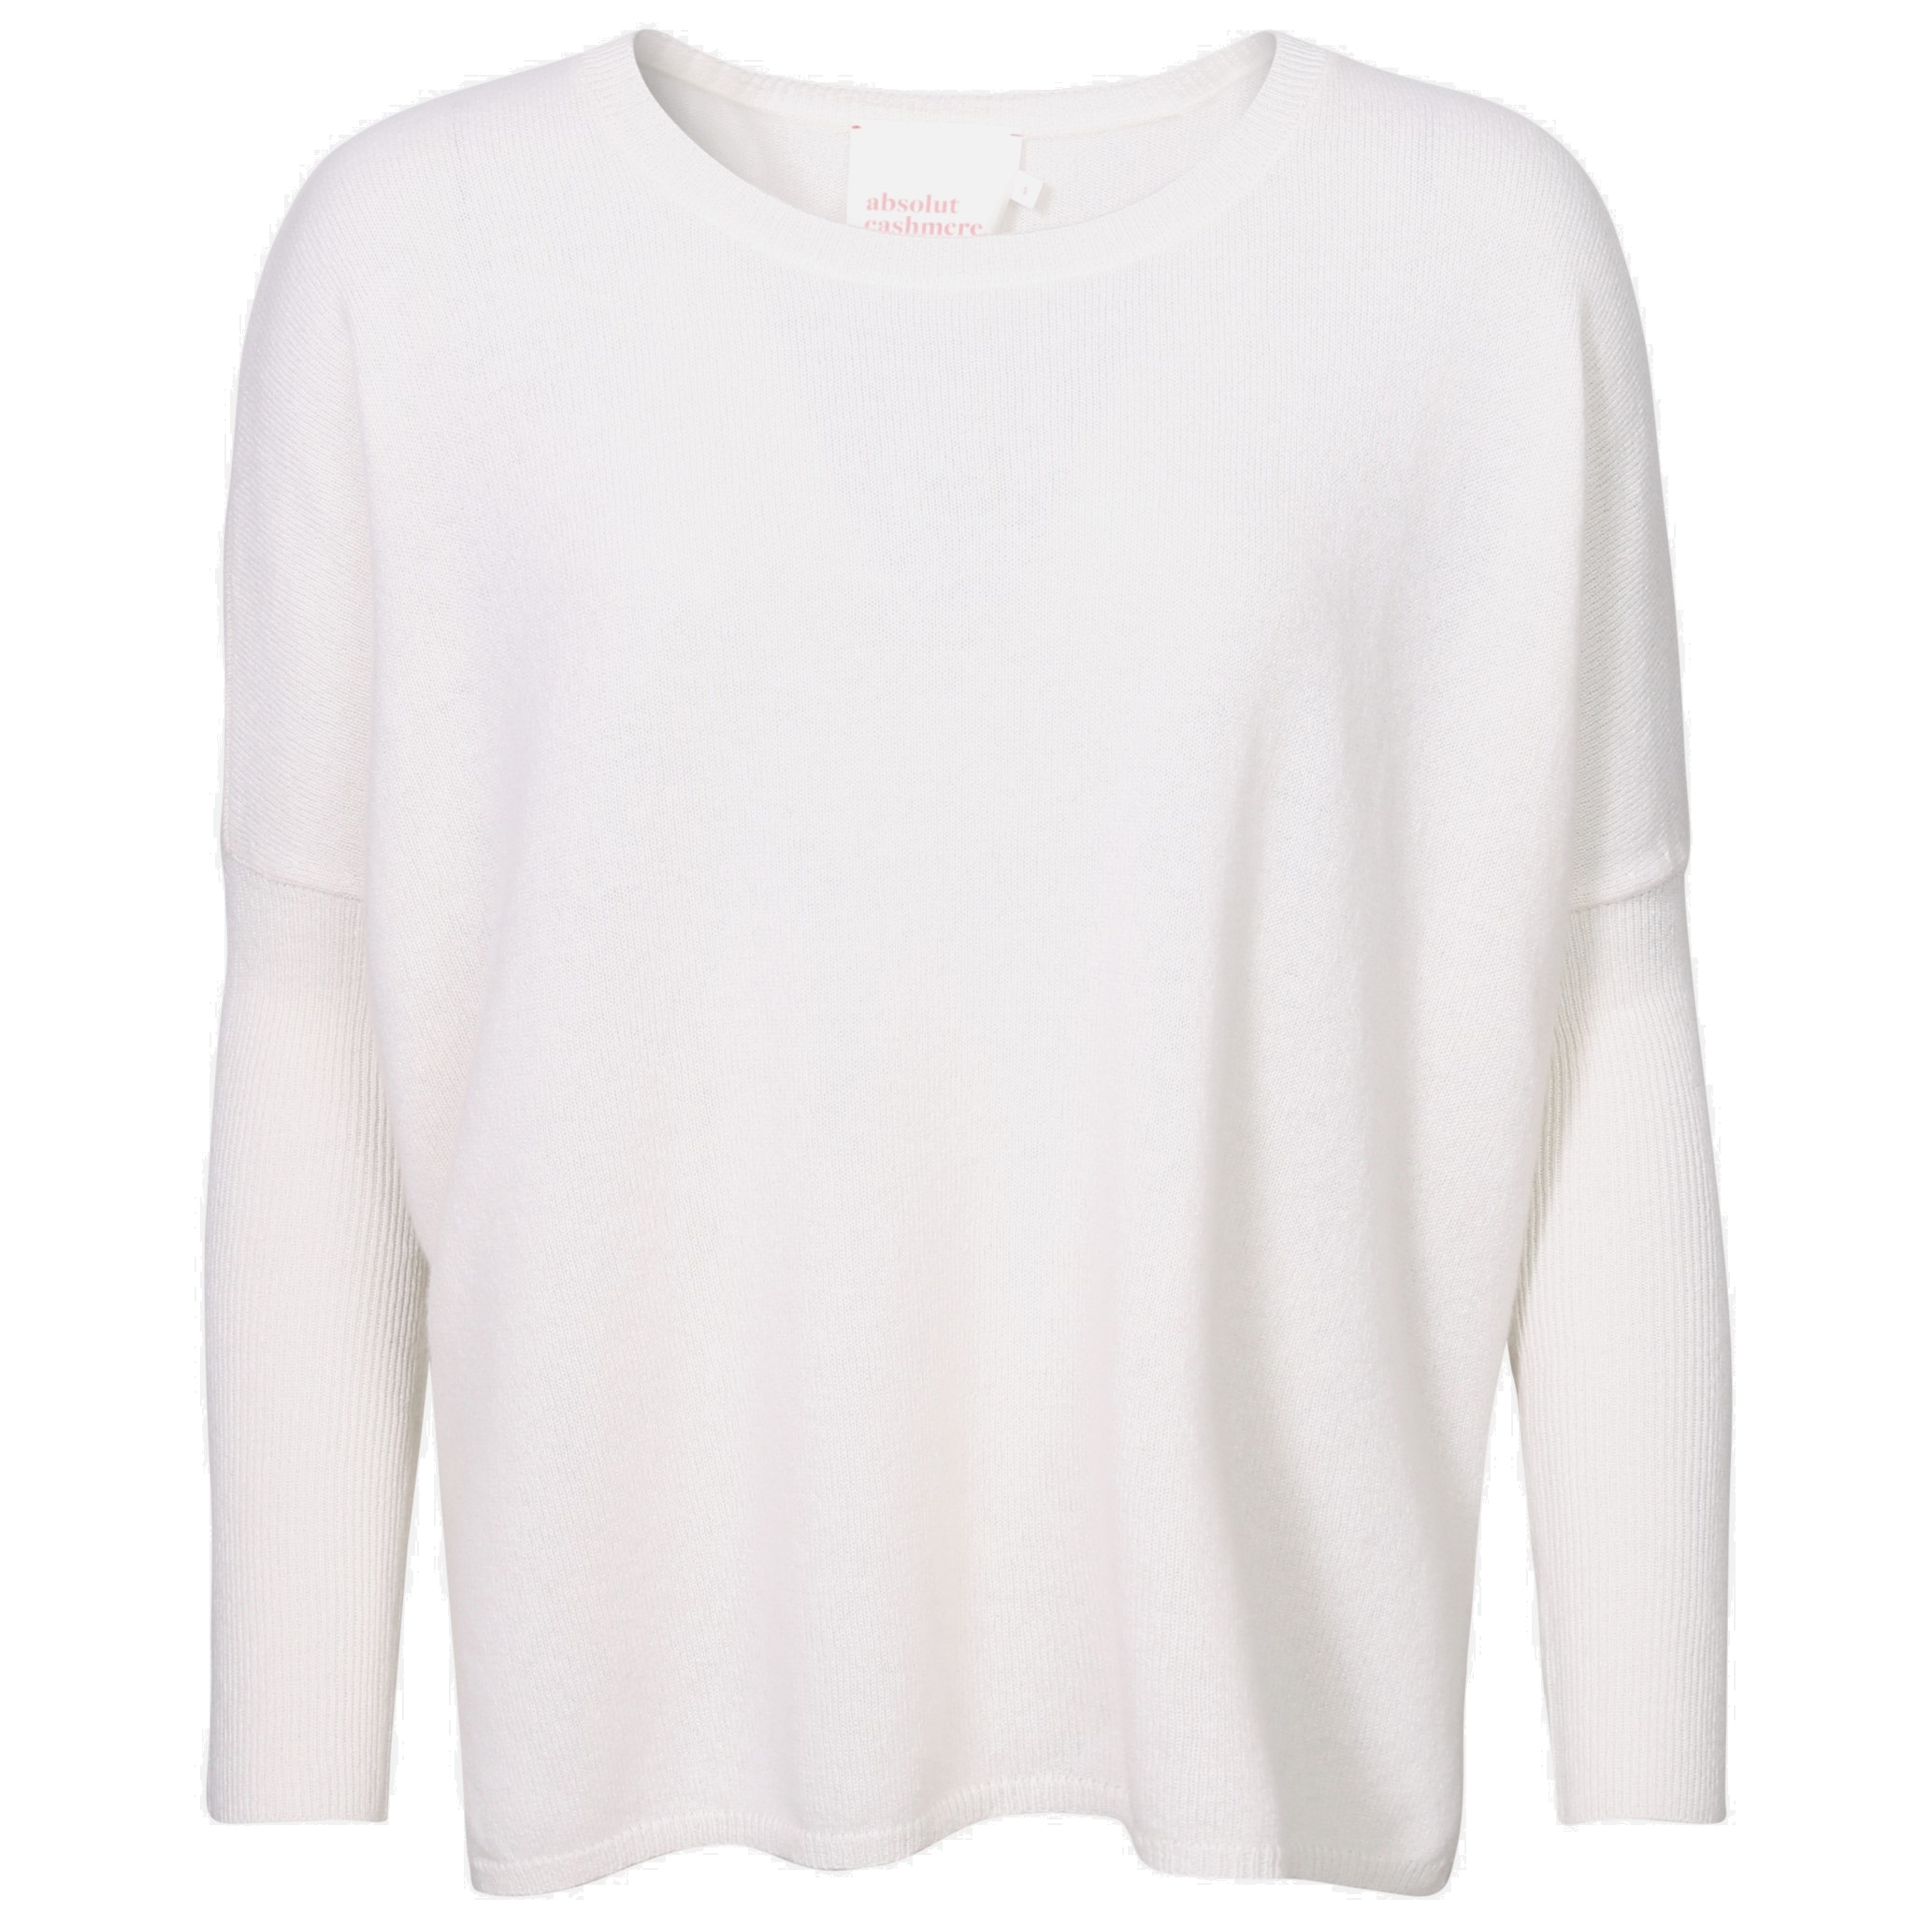 ABSOLUT CASHMERE Poncho Sweater Astrid in Off White